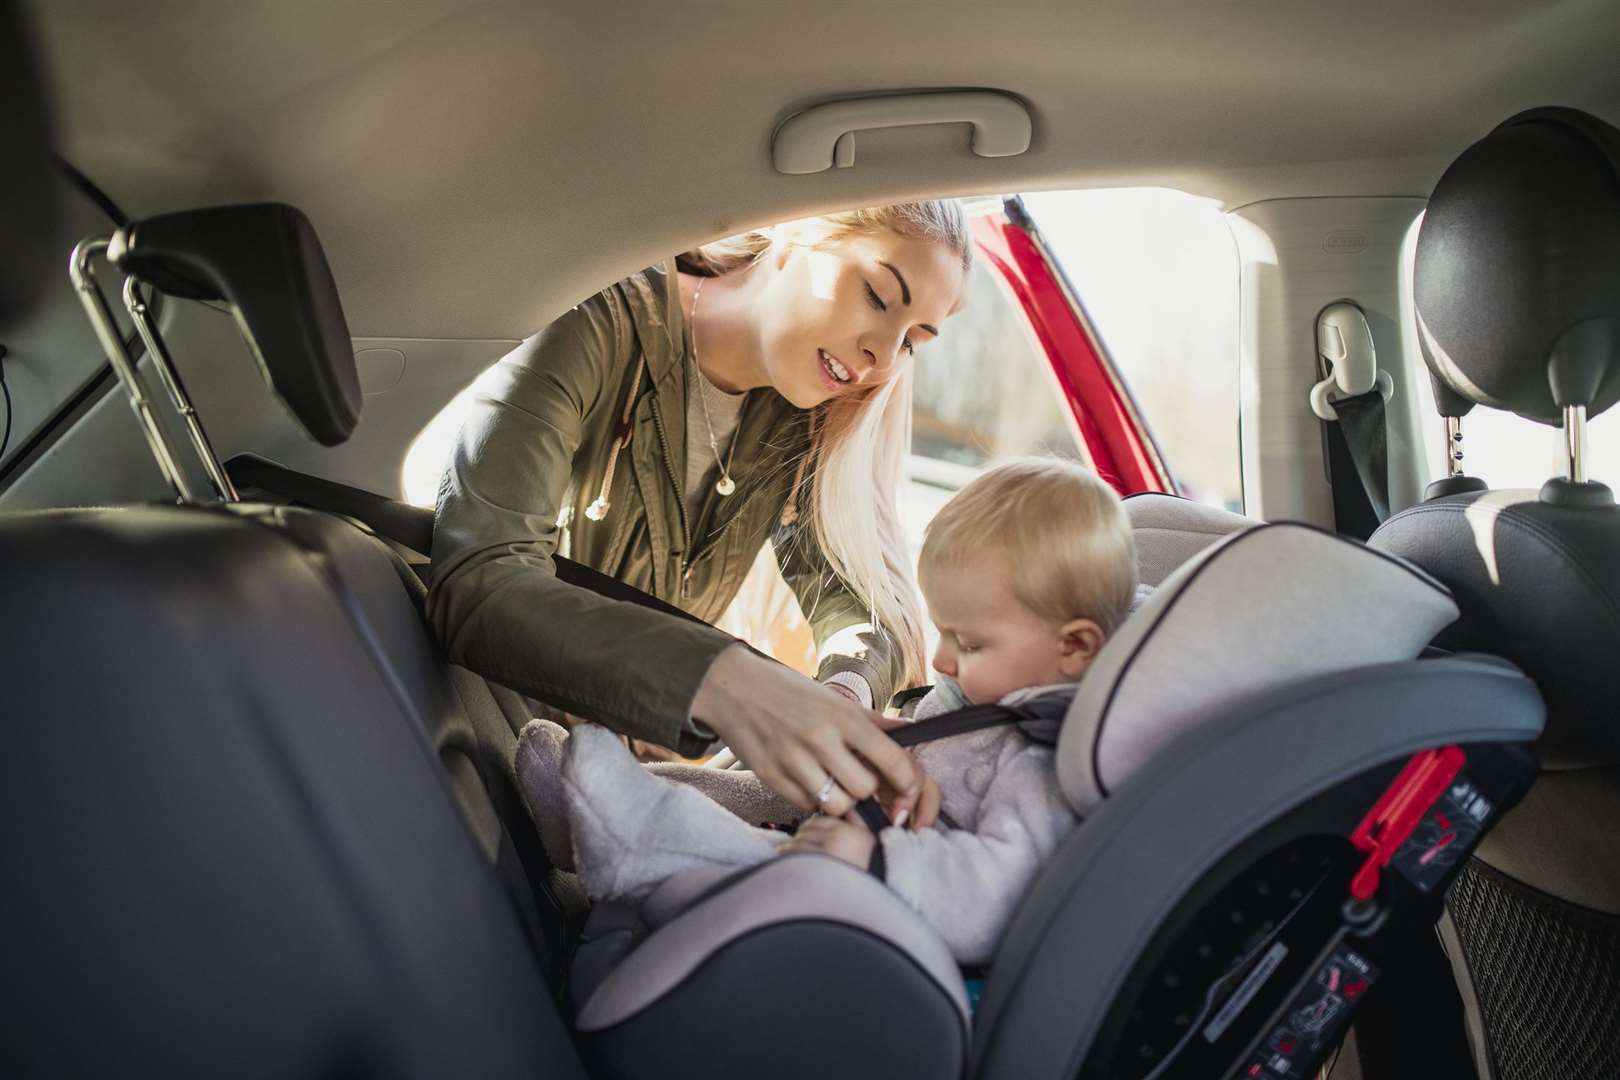 Find out how to fit your child's car seat correctly on Tuesday, February 2